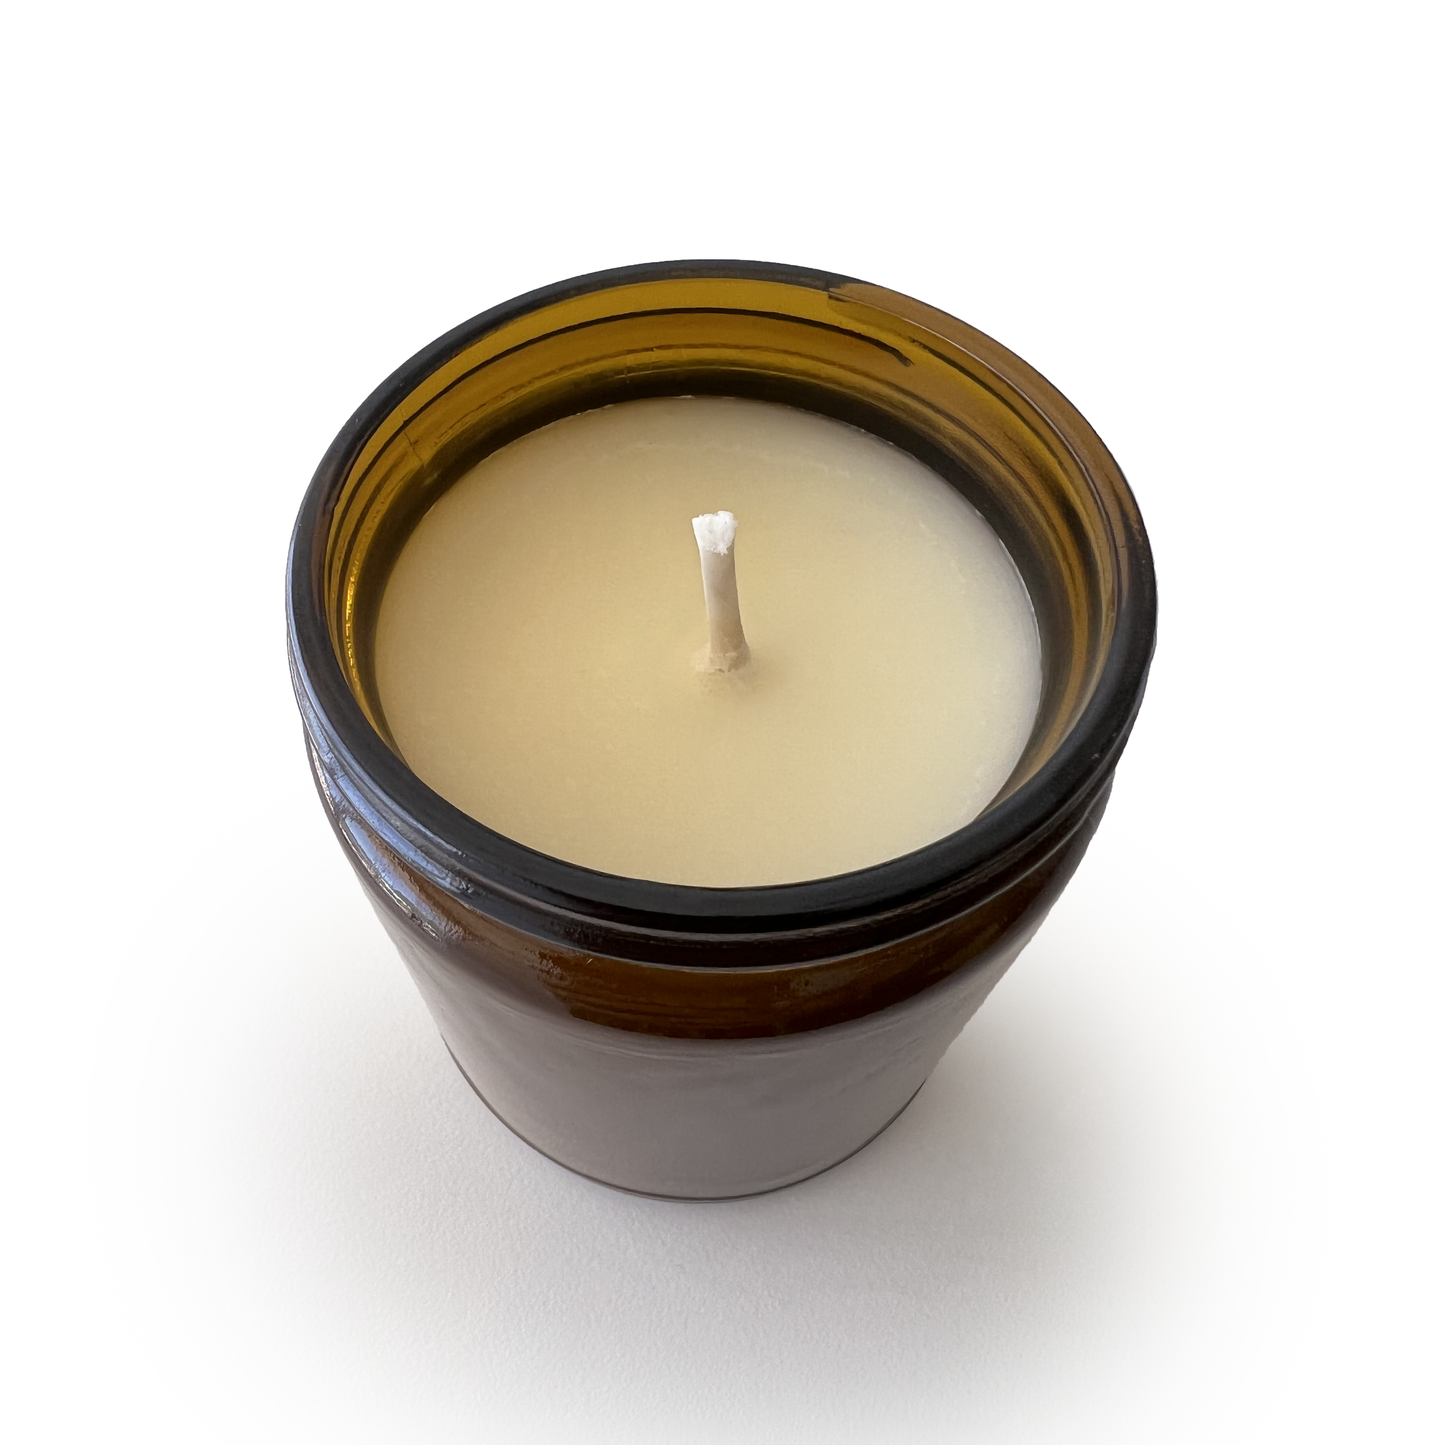 Plant Person - Soy Candle 9oz